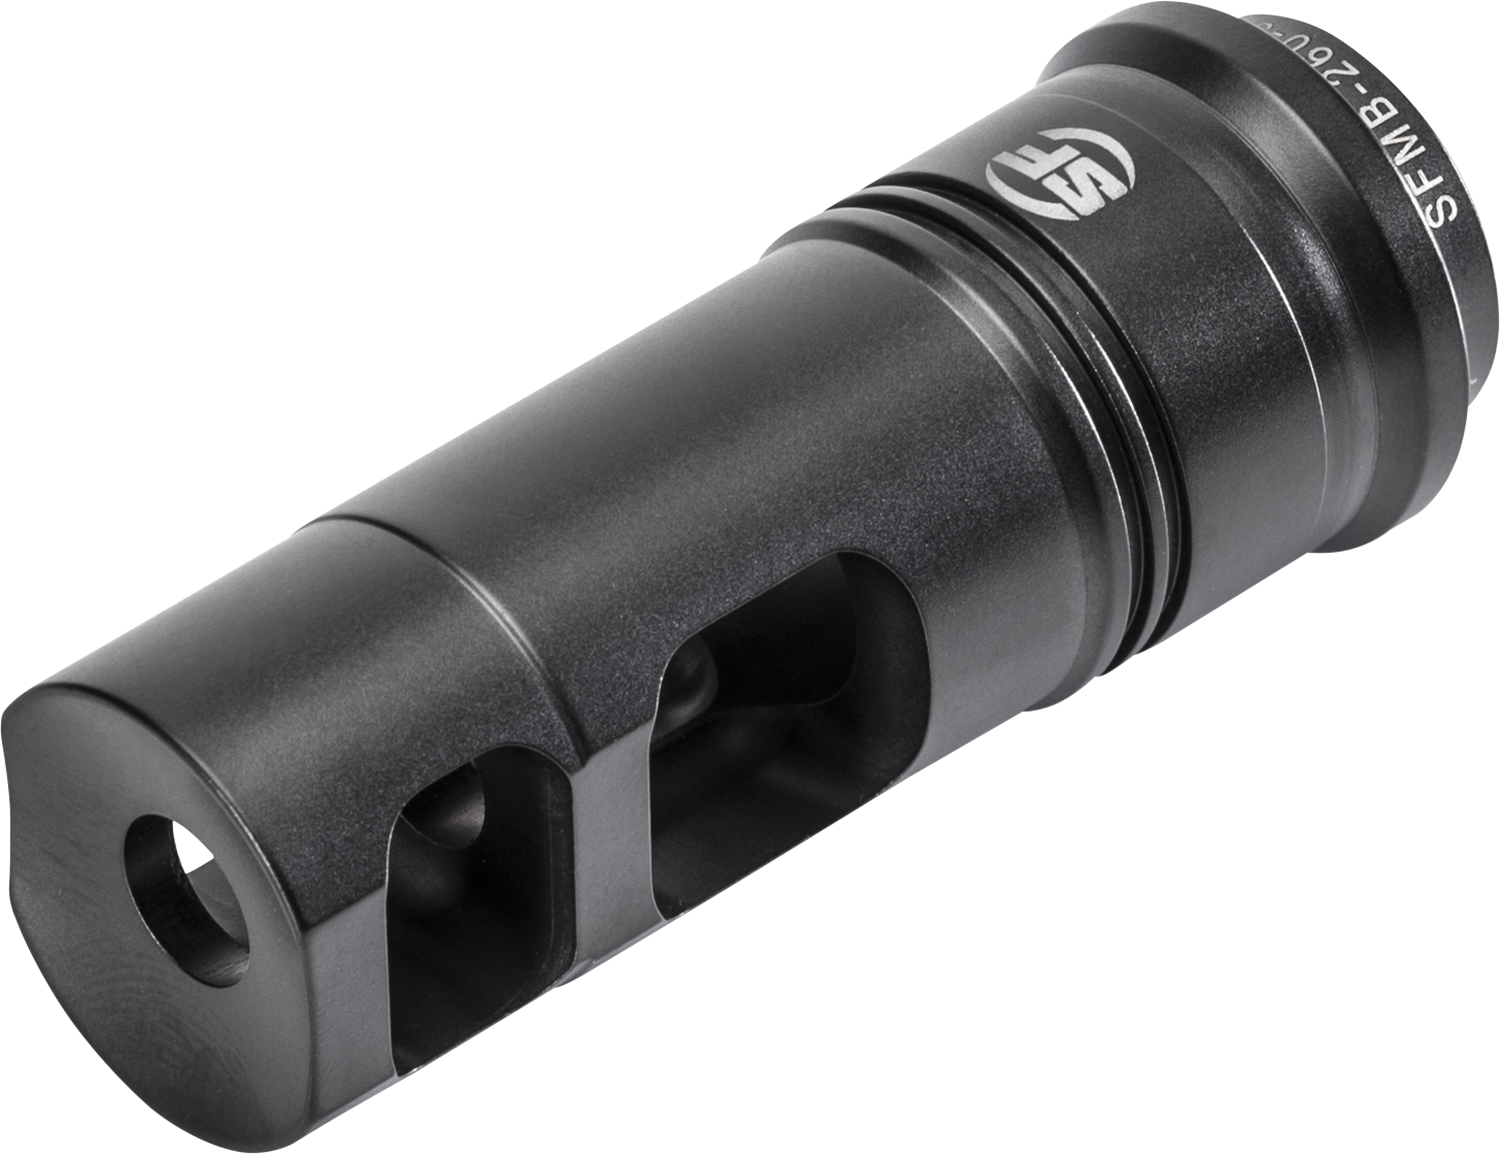 SureFire - Flash Hiders & Muzzle Brakes Can Now Be EAR99 Exported -The Firearm Blog